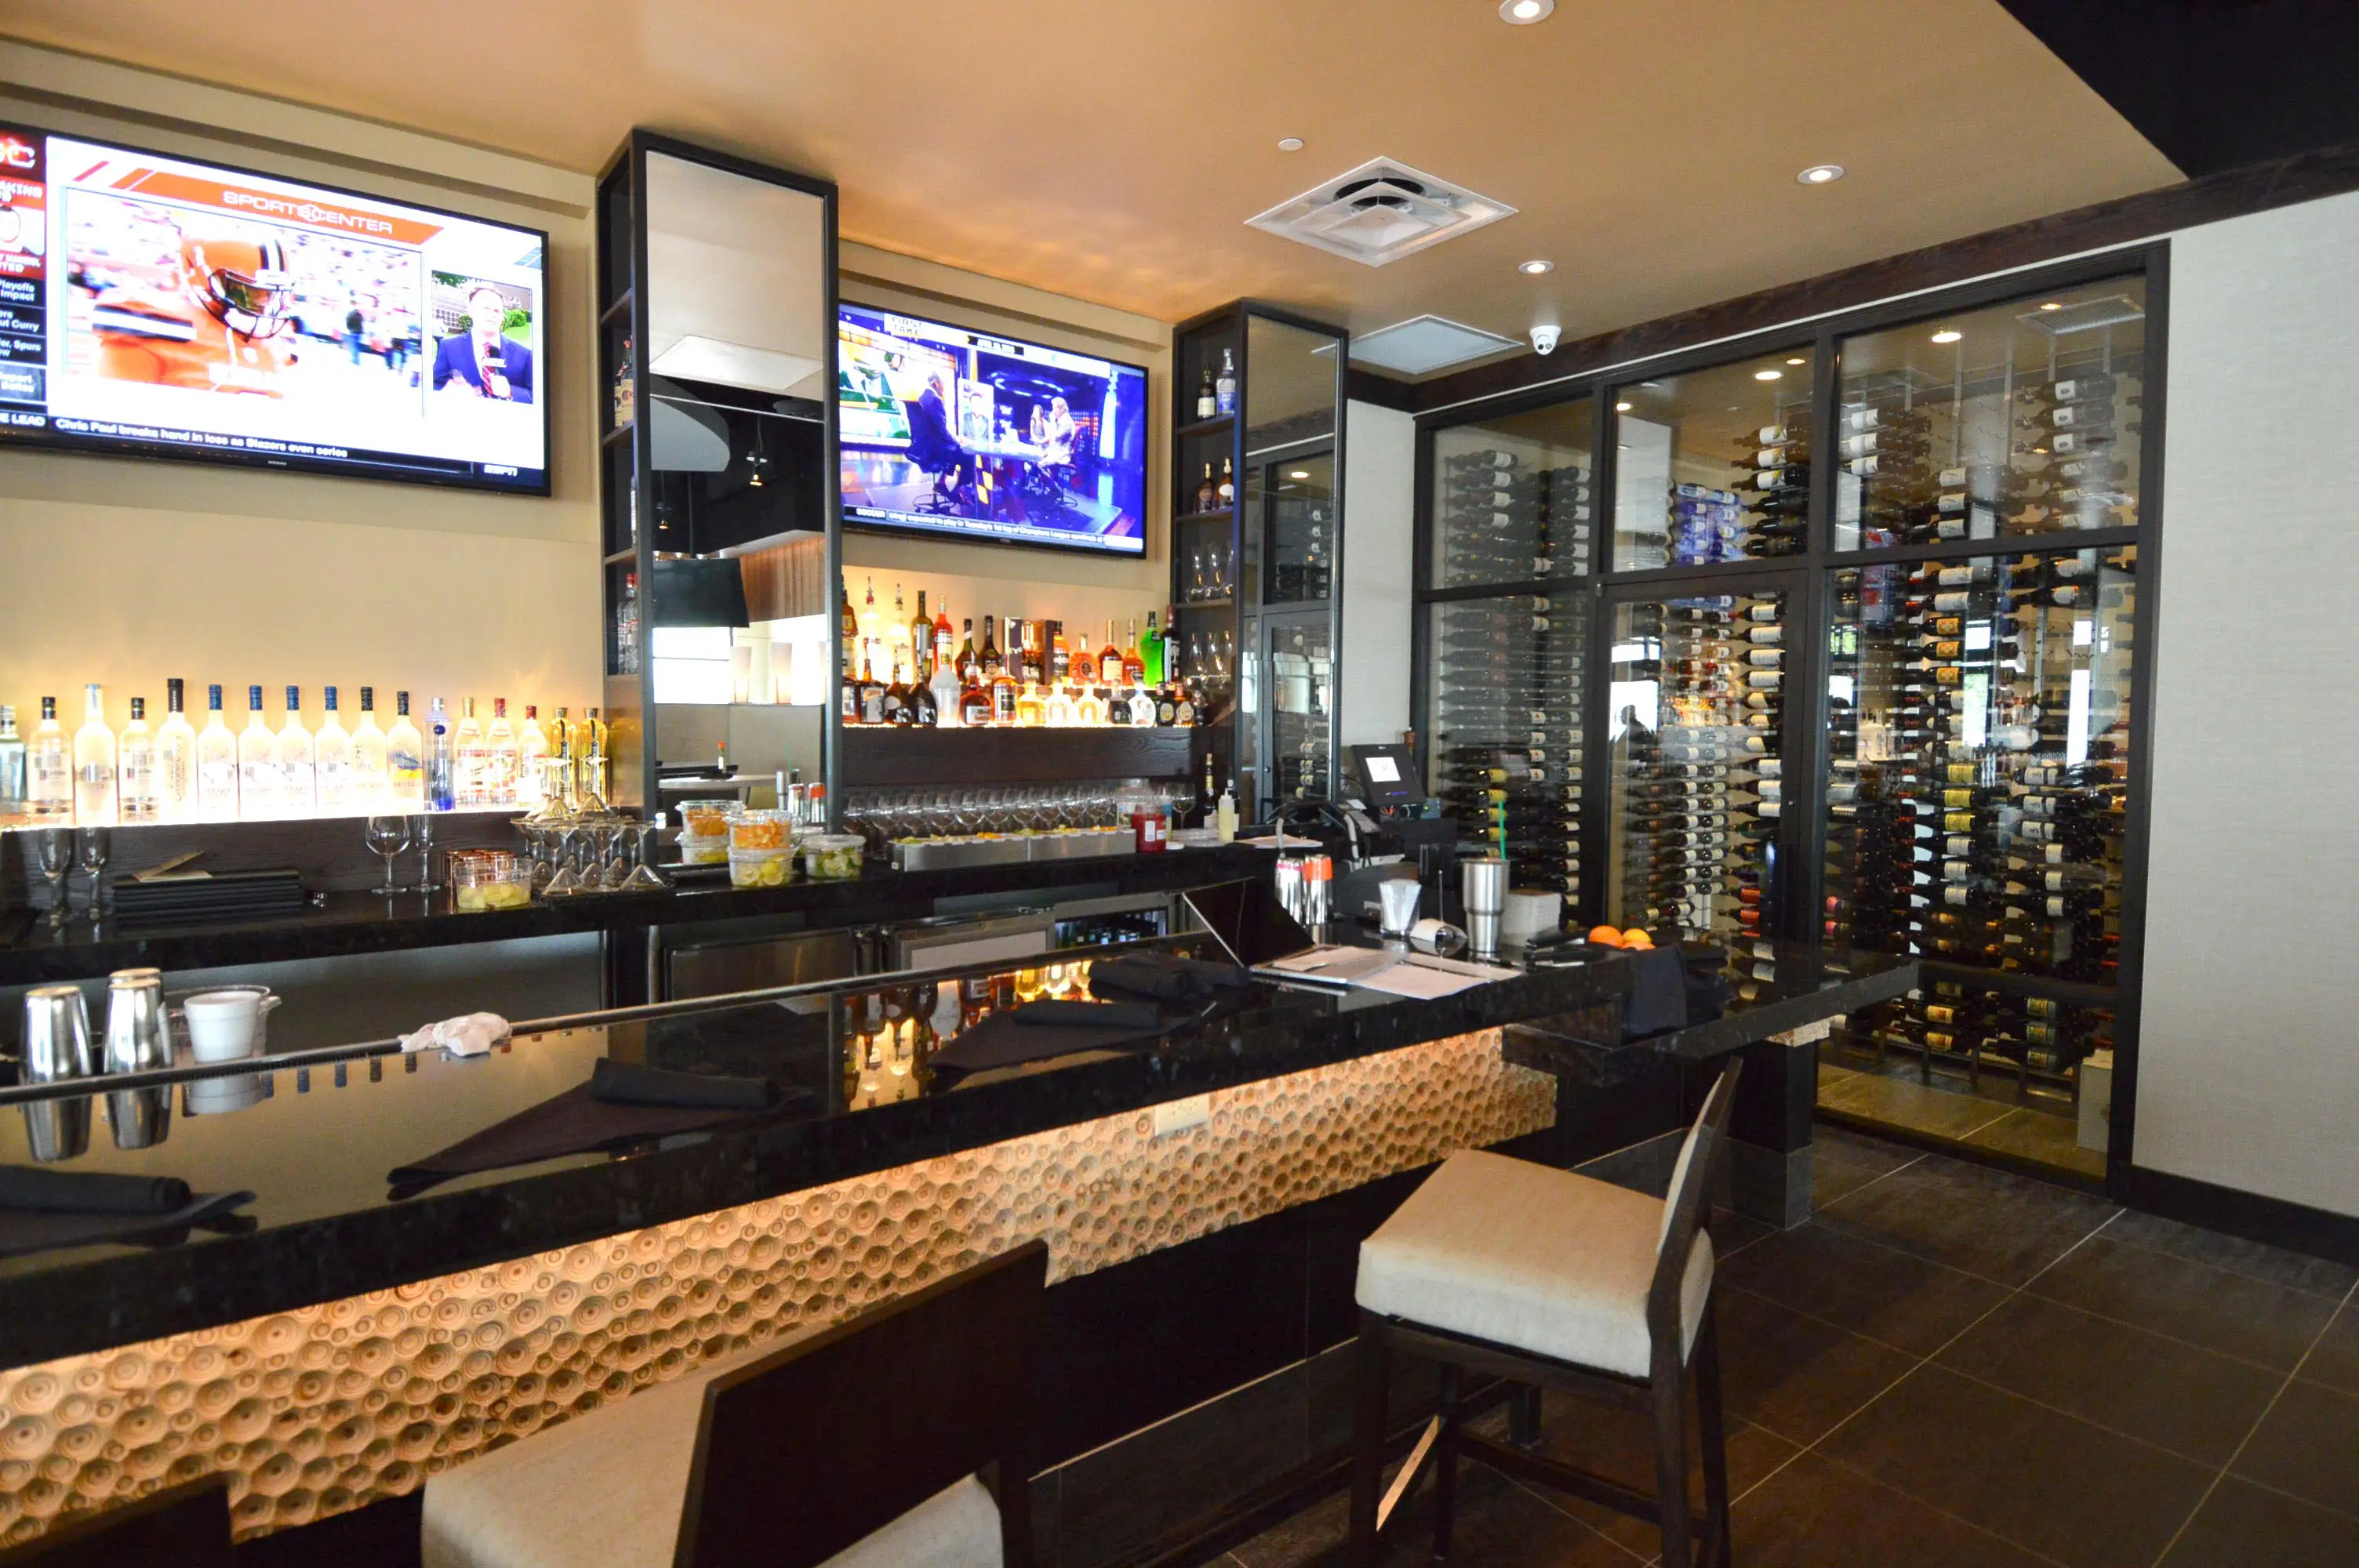 A Custom Commercial Wine Cellar Puts the Fine in Fine Wine and Dining at Jasper's Restaurant at Cityline in Richardson Texas